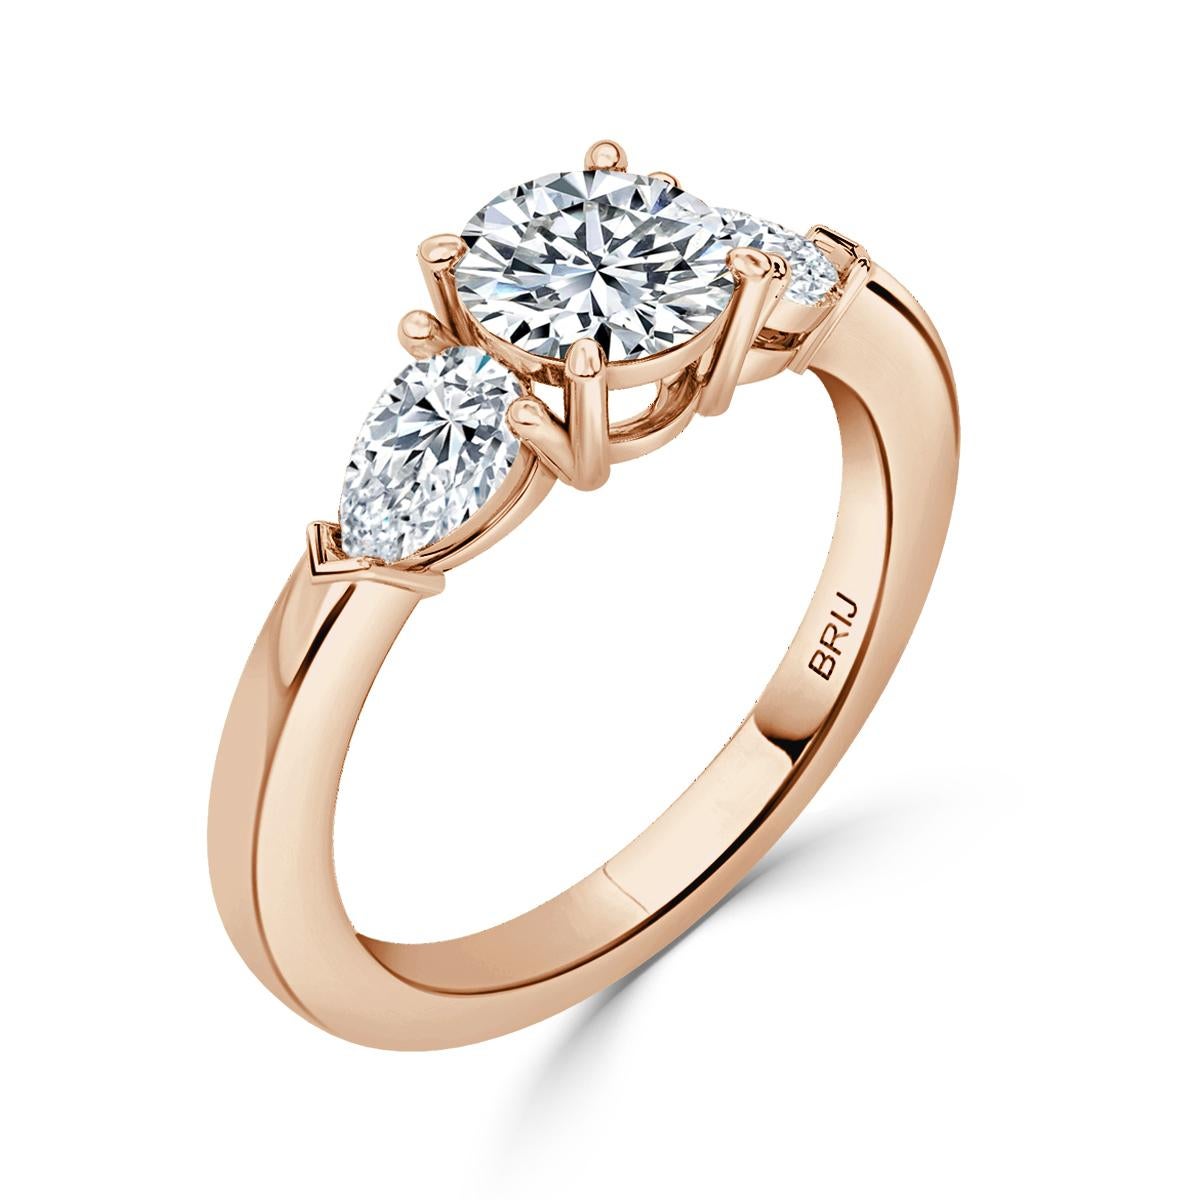 Simple, Classic 3 Stone Diamond engagement ring. Accented with 2 Pear cut GIA Diamonds along the shank  in a 18k Rose Gold setting. 
GIA certified round center stone 0.80 CT
Side Pear Carat weight 0.60 CT

GIA Certified Diamond Details
Weight: 0.80